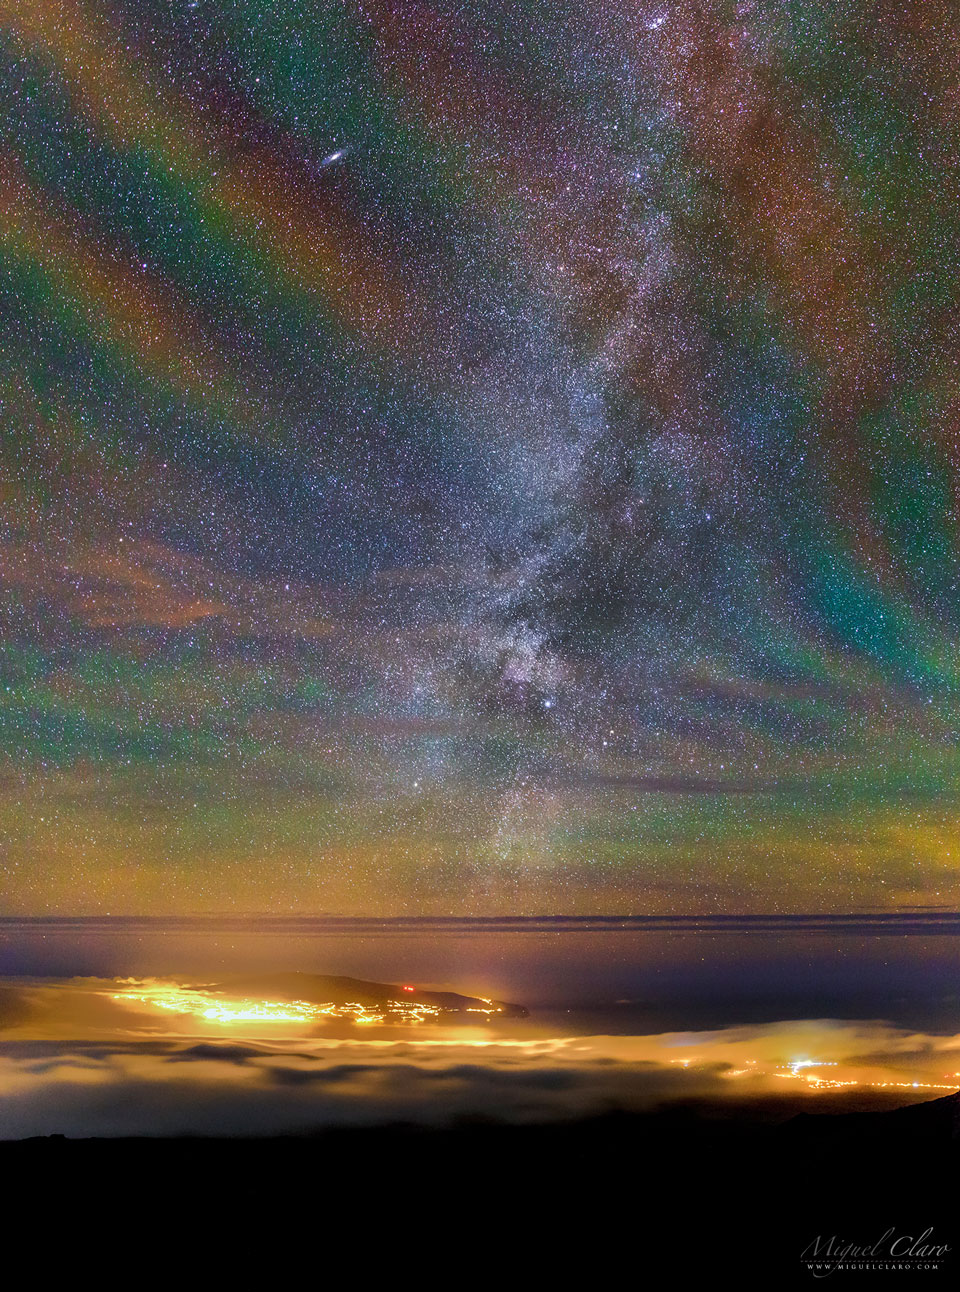 Rainbow airglow over the Azores.  See Explanation.
Moving the cursor over the image will bring up an annotated version.
Clicking on the image will bring up the highest resolution version
available.